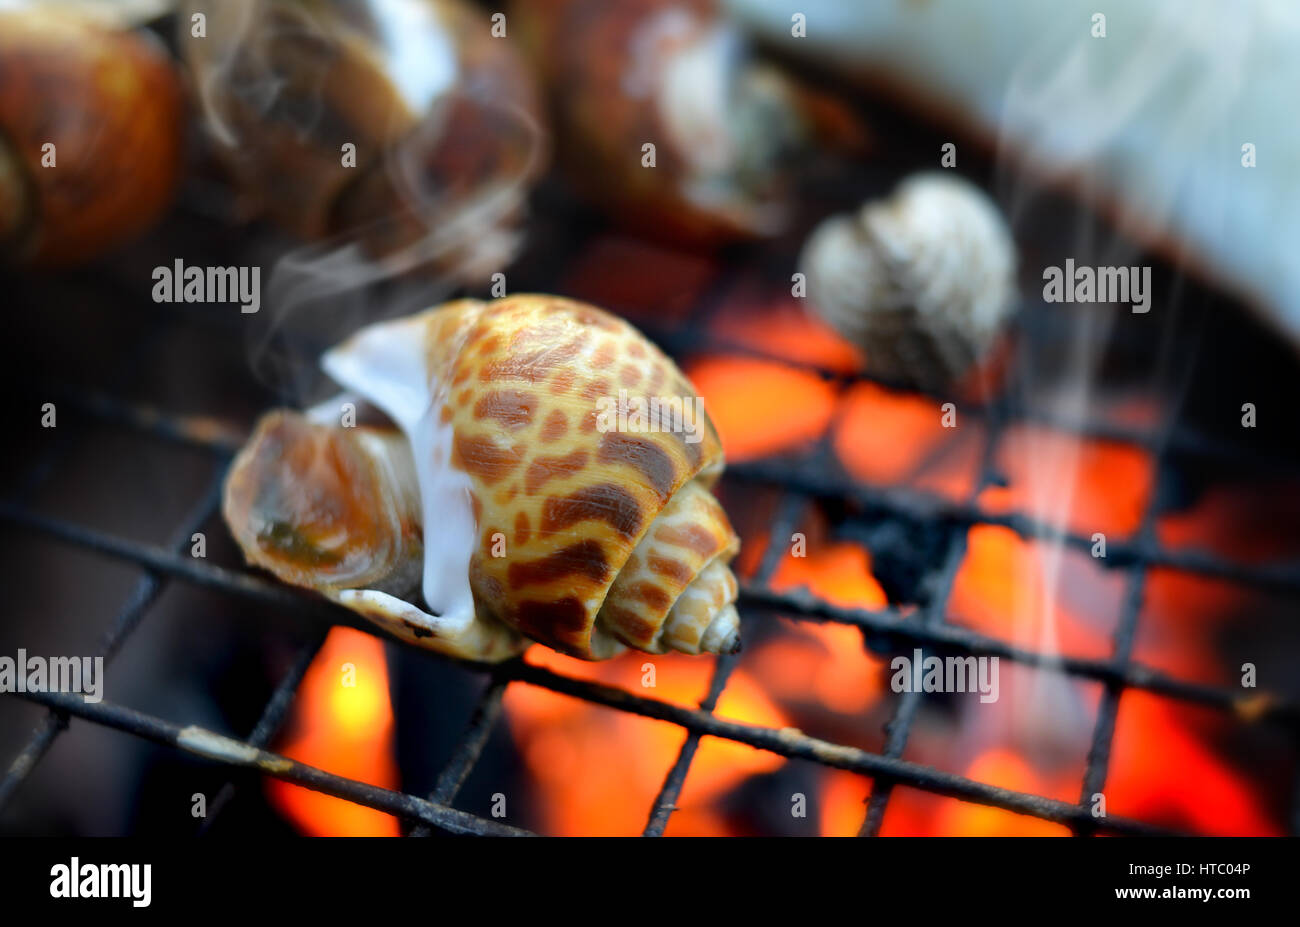 Spotted babylon grill on charcoal fire in outdoor after sunset low lighting. Stock Photo